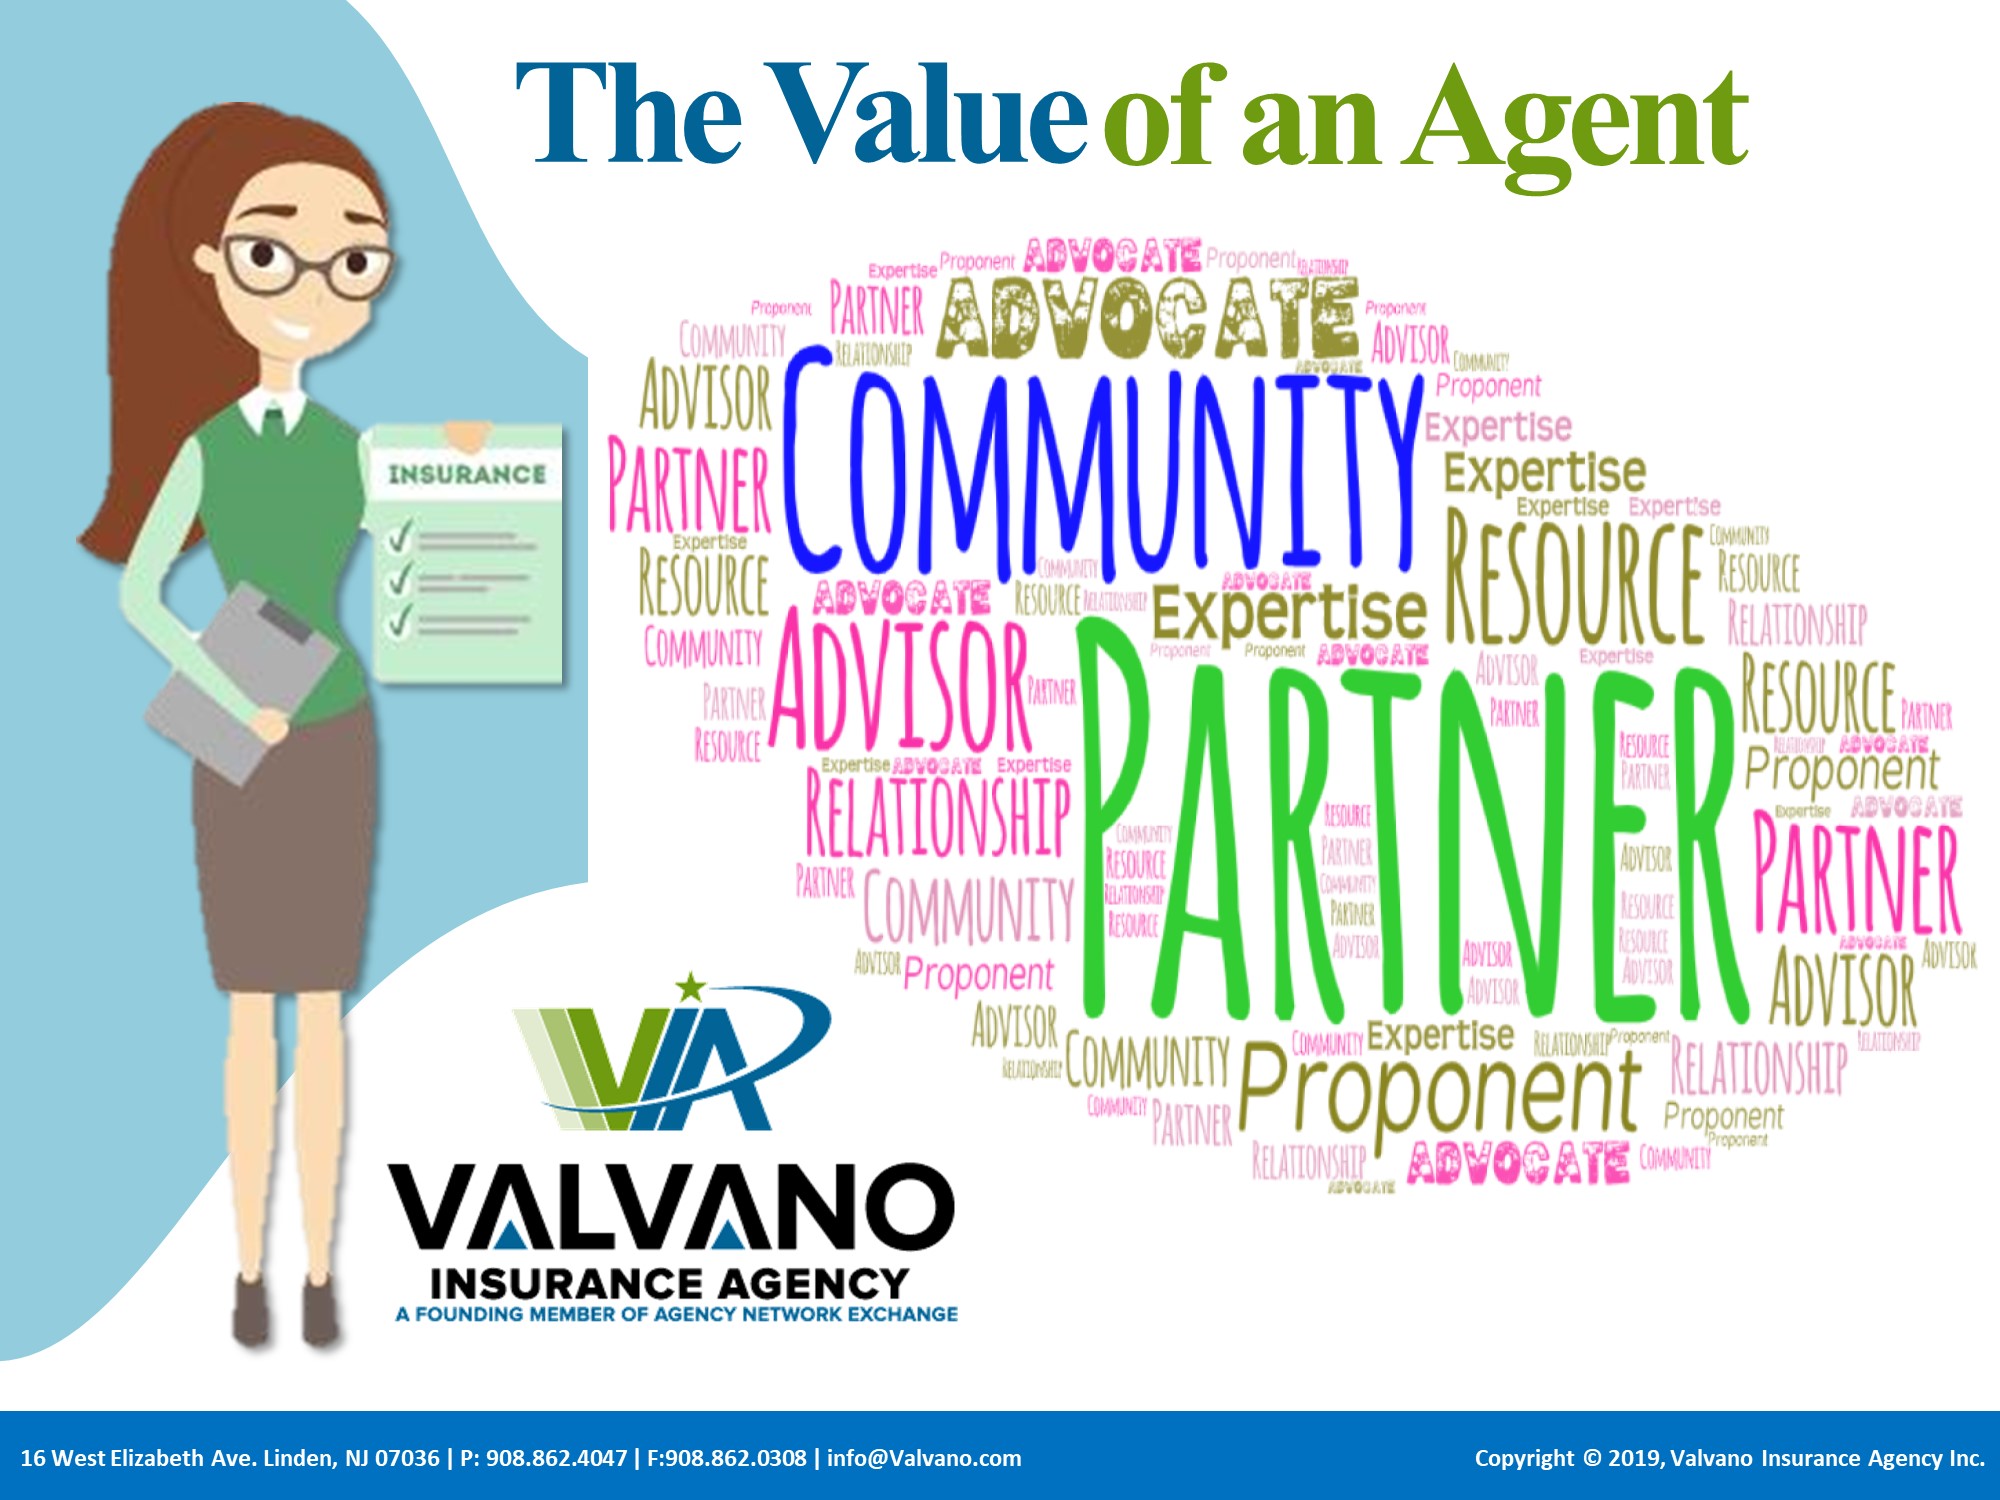 The Value of an Agent - Community Partner